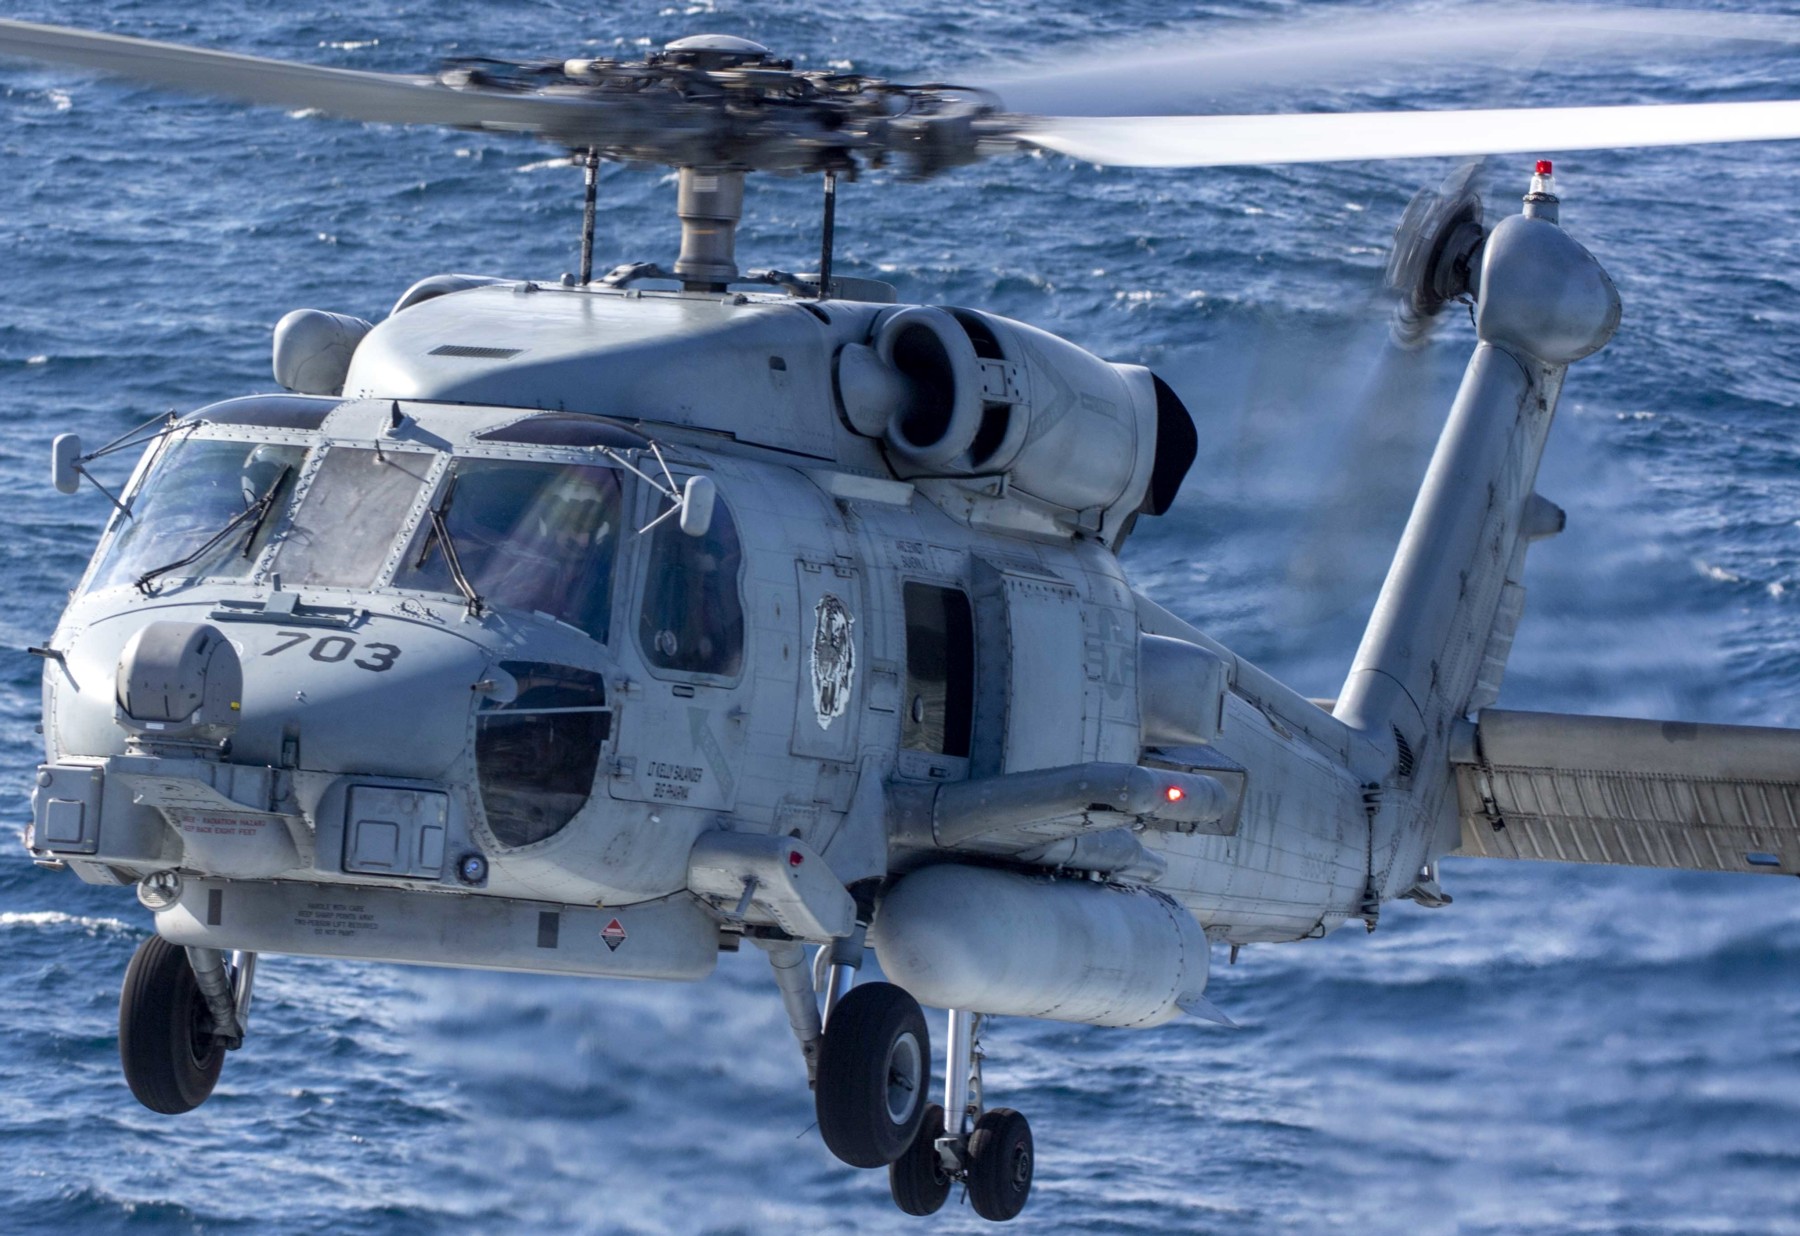 hsm-73 battlecats helicopter maritime strike squadron us navy mh-60r seahawk 2013 89 agm-114 hellfire missile